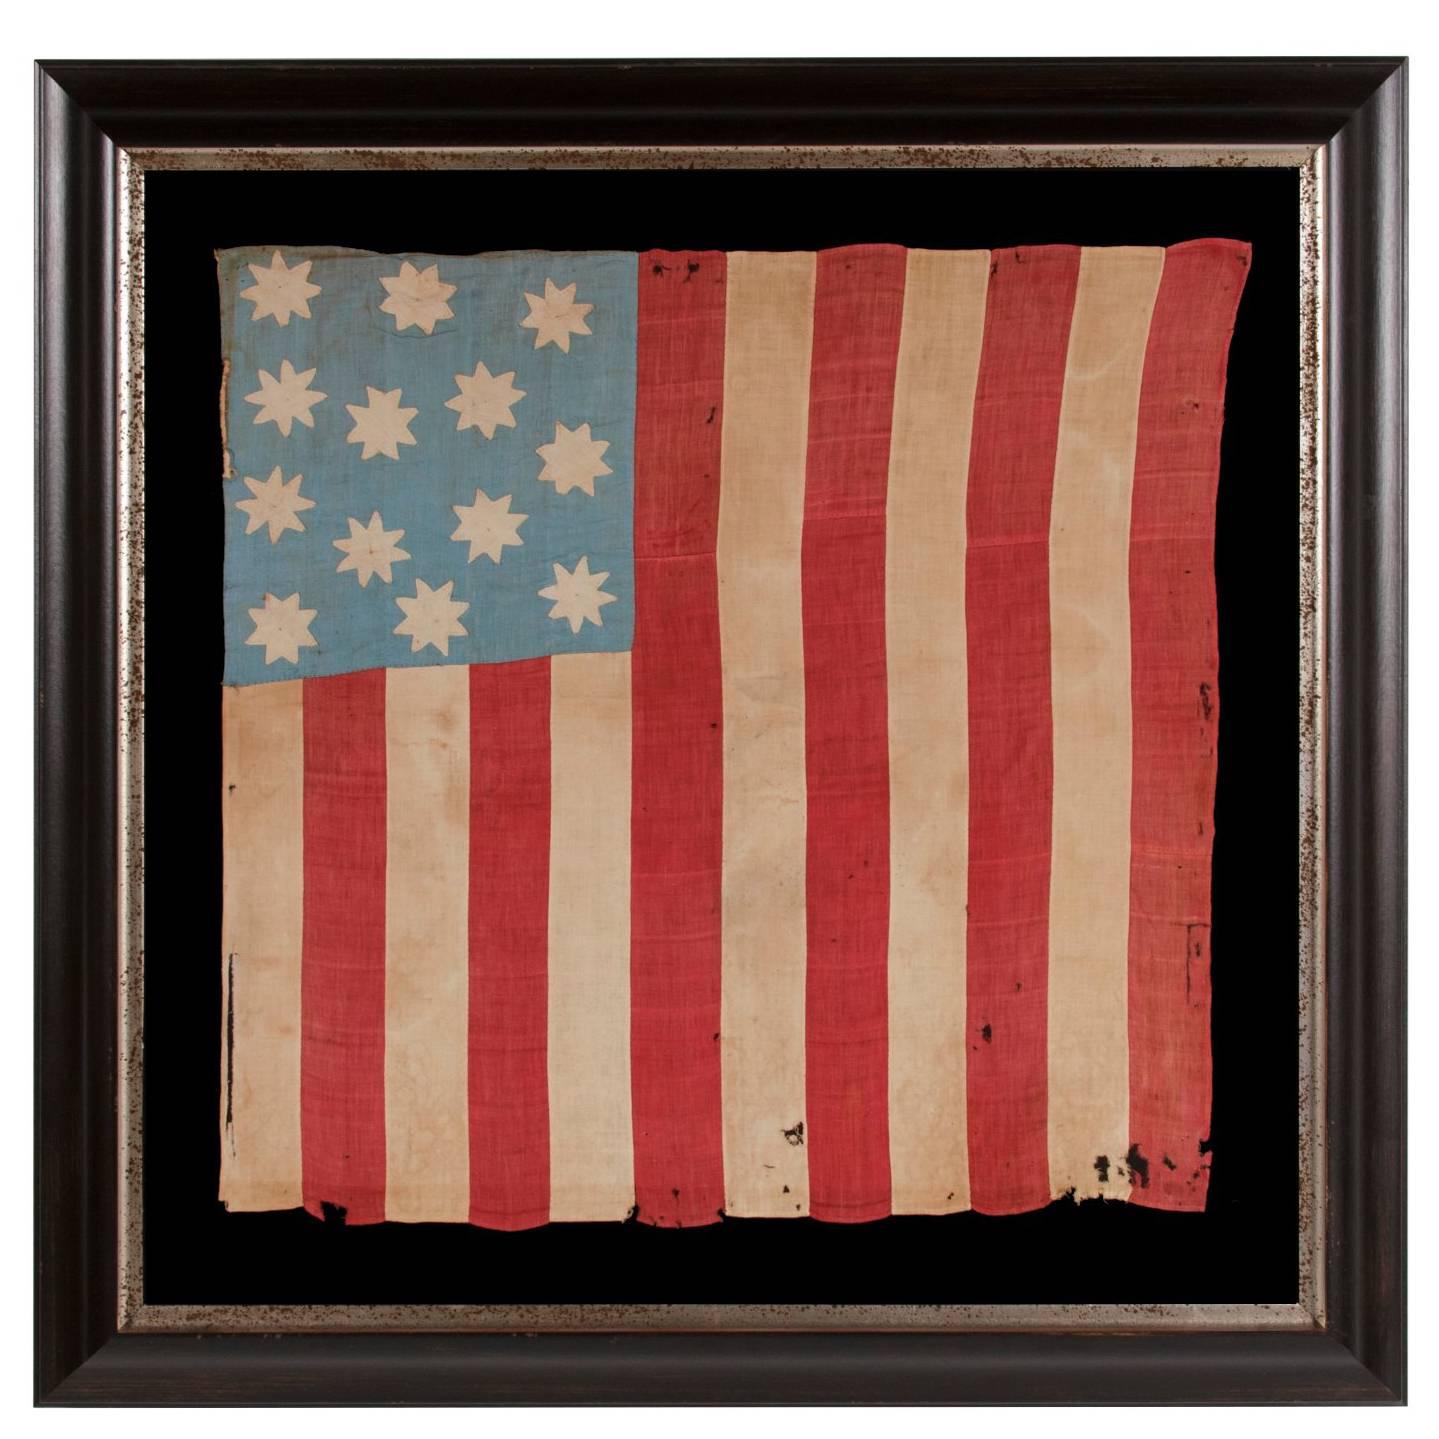 Hand-Sewn, 13 Star American National Flag with 8-Pointed Stars on Glazed Cotton